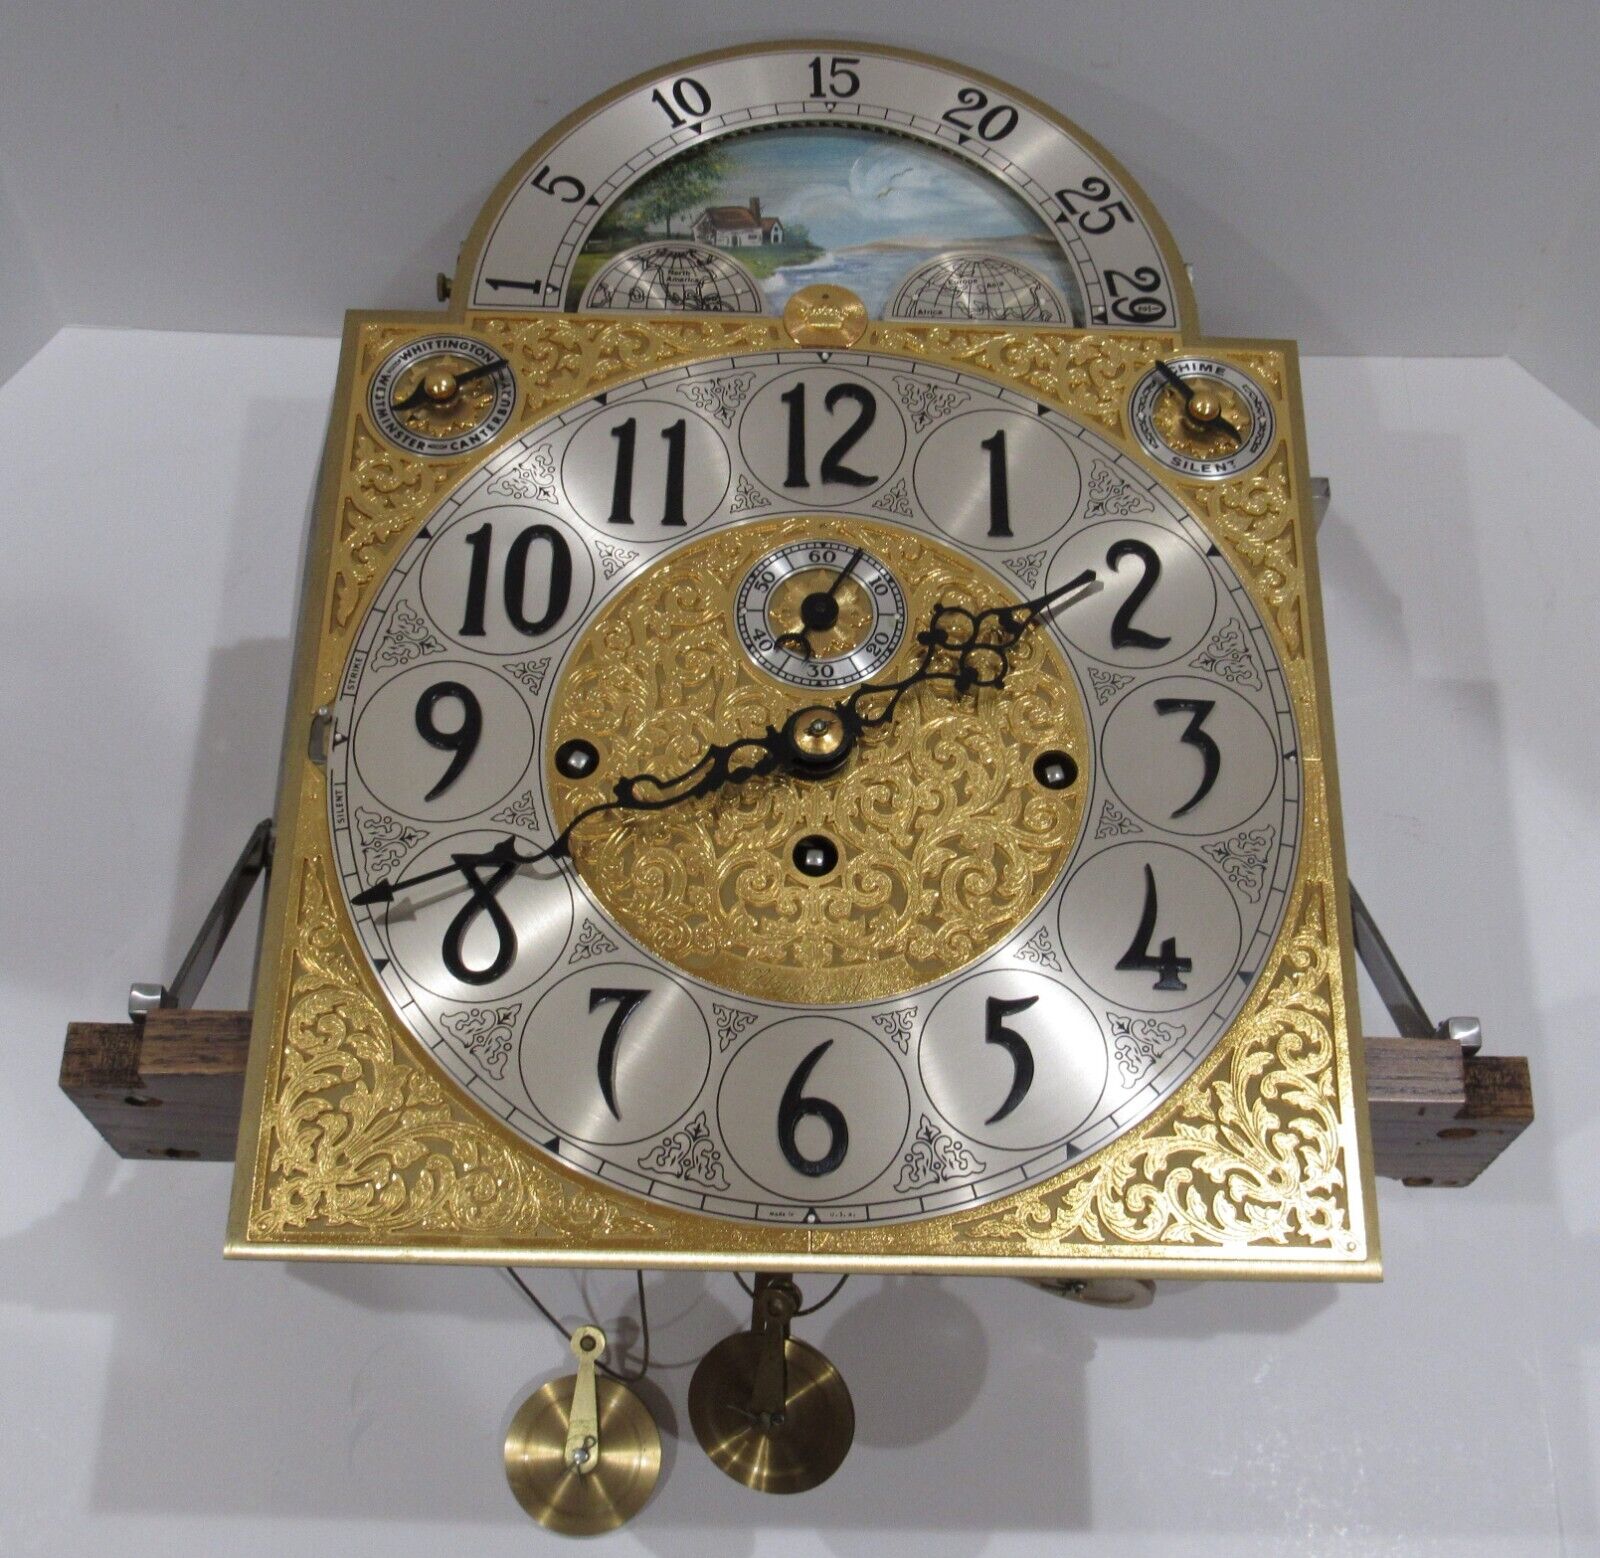 Herschede 9 Tube Grandfather Clock Movement Canterbury, Whittington, Westminster